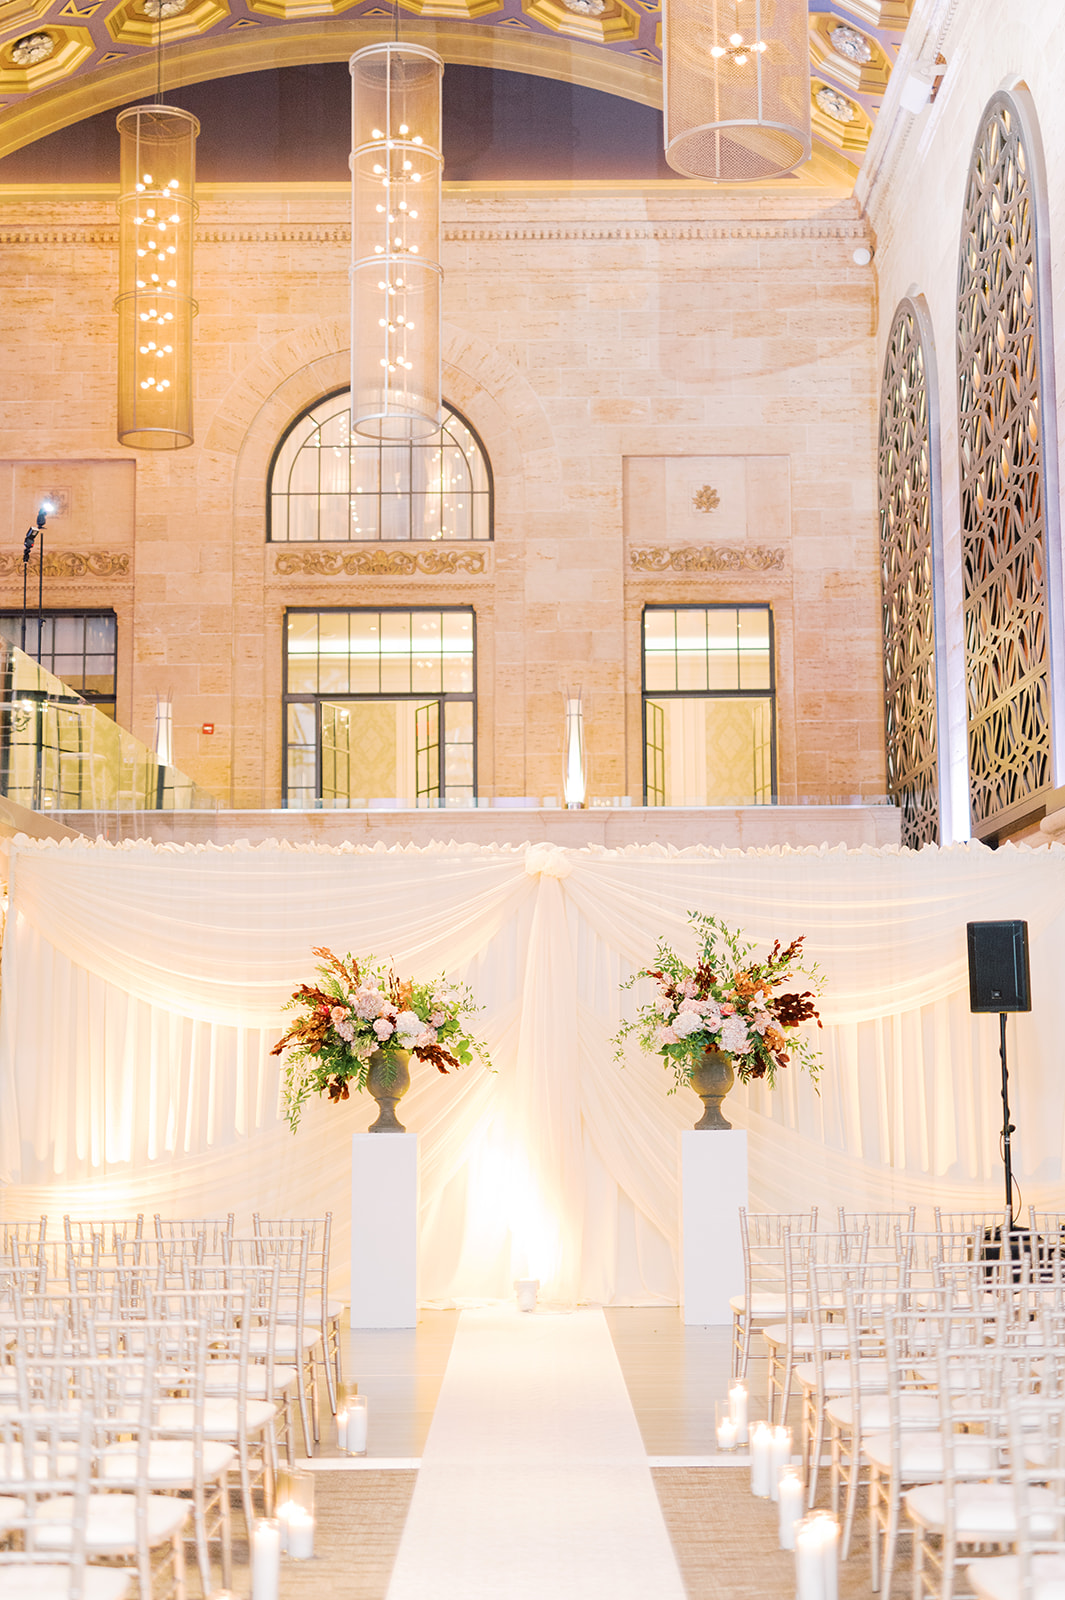 modern wedding ceremony in historic building for Classic and Airy AutumnWedding at Philadelphia’s Union Trust